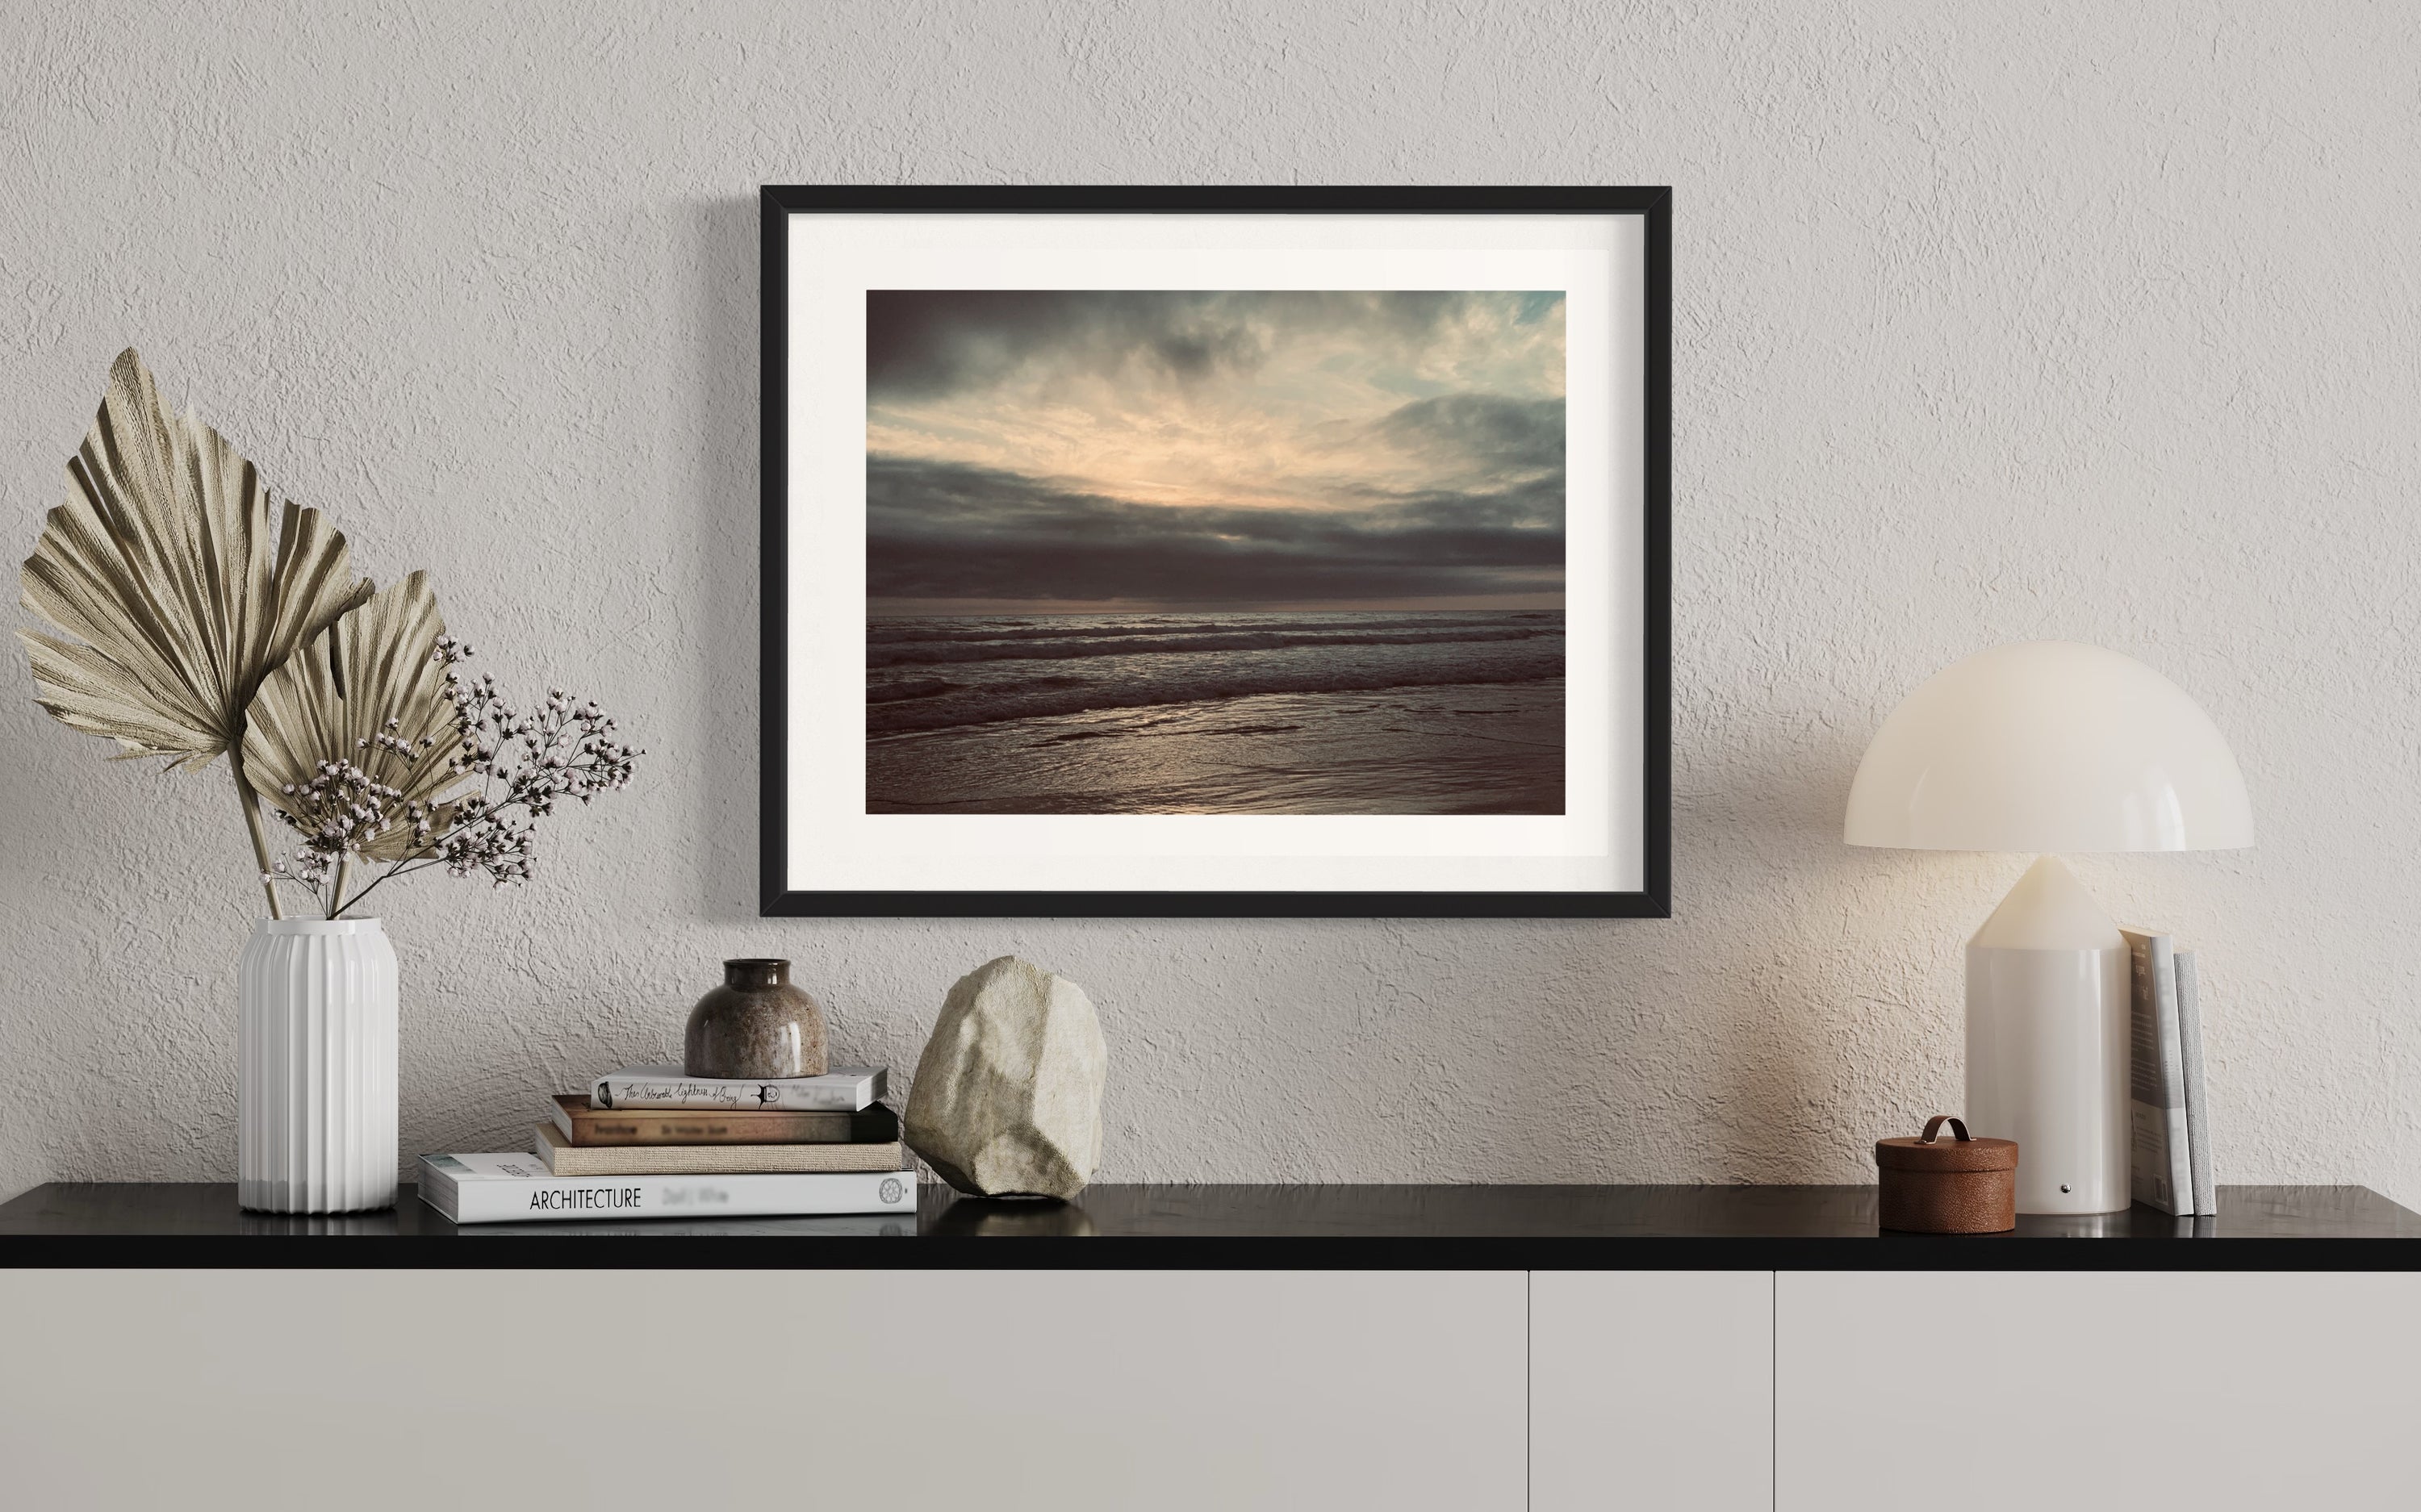 Del Mar Sunset, Limited Edition Print